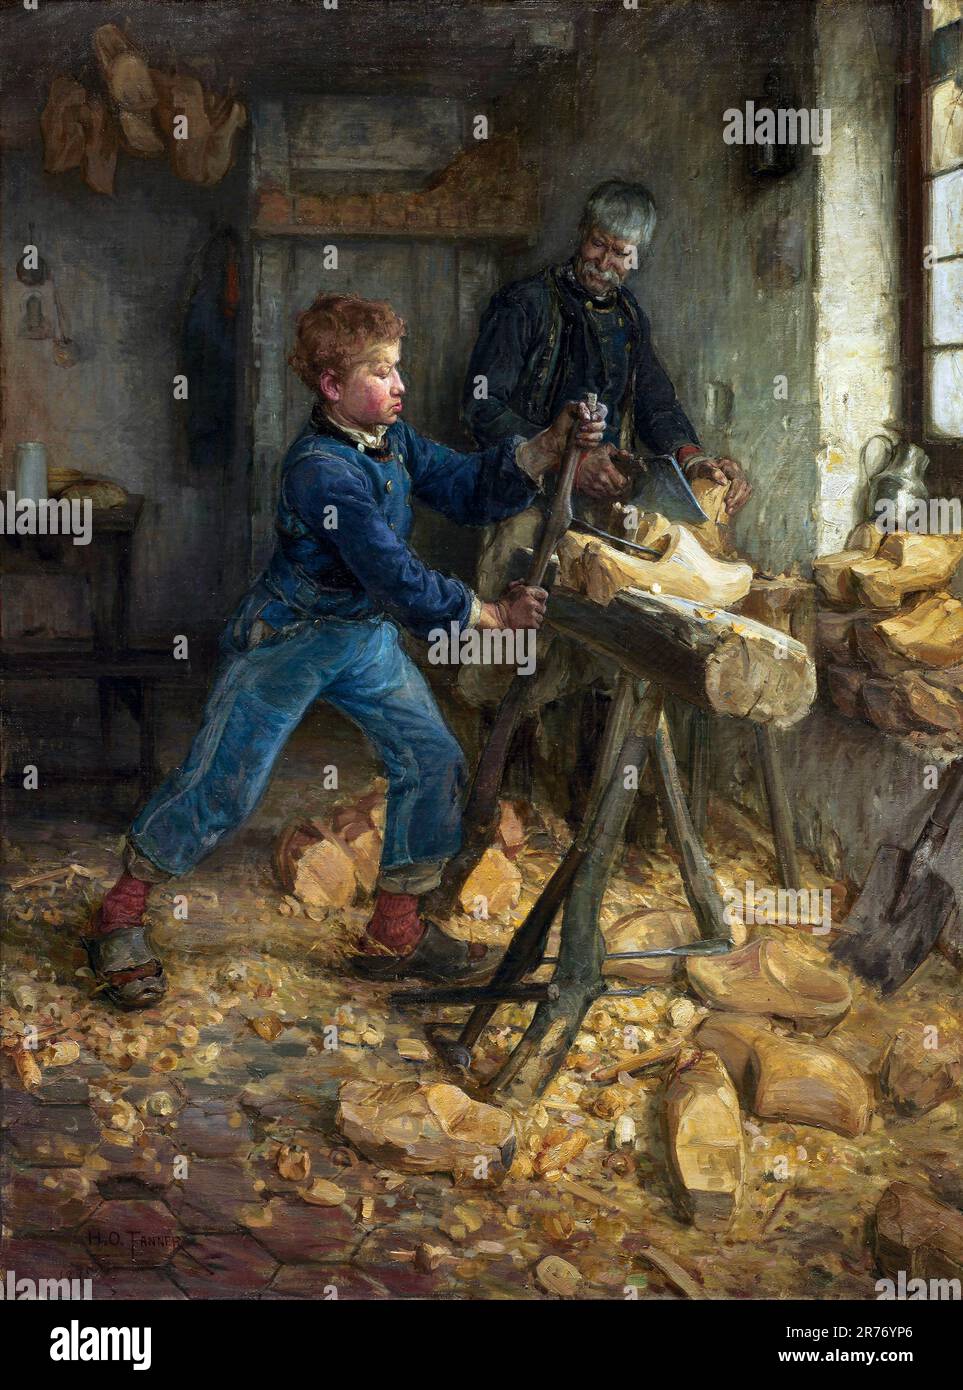 The Young Sabot Maker by the American artist, Henry Ossawa Tanner (1859-1937), oil on canvas, 1895 Stock Photo